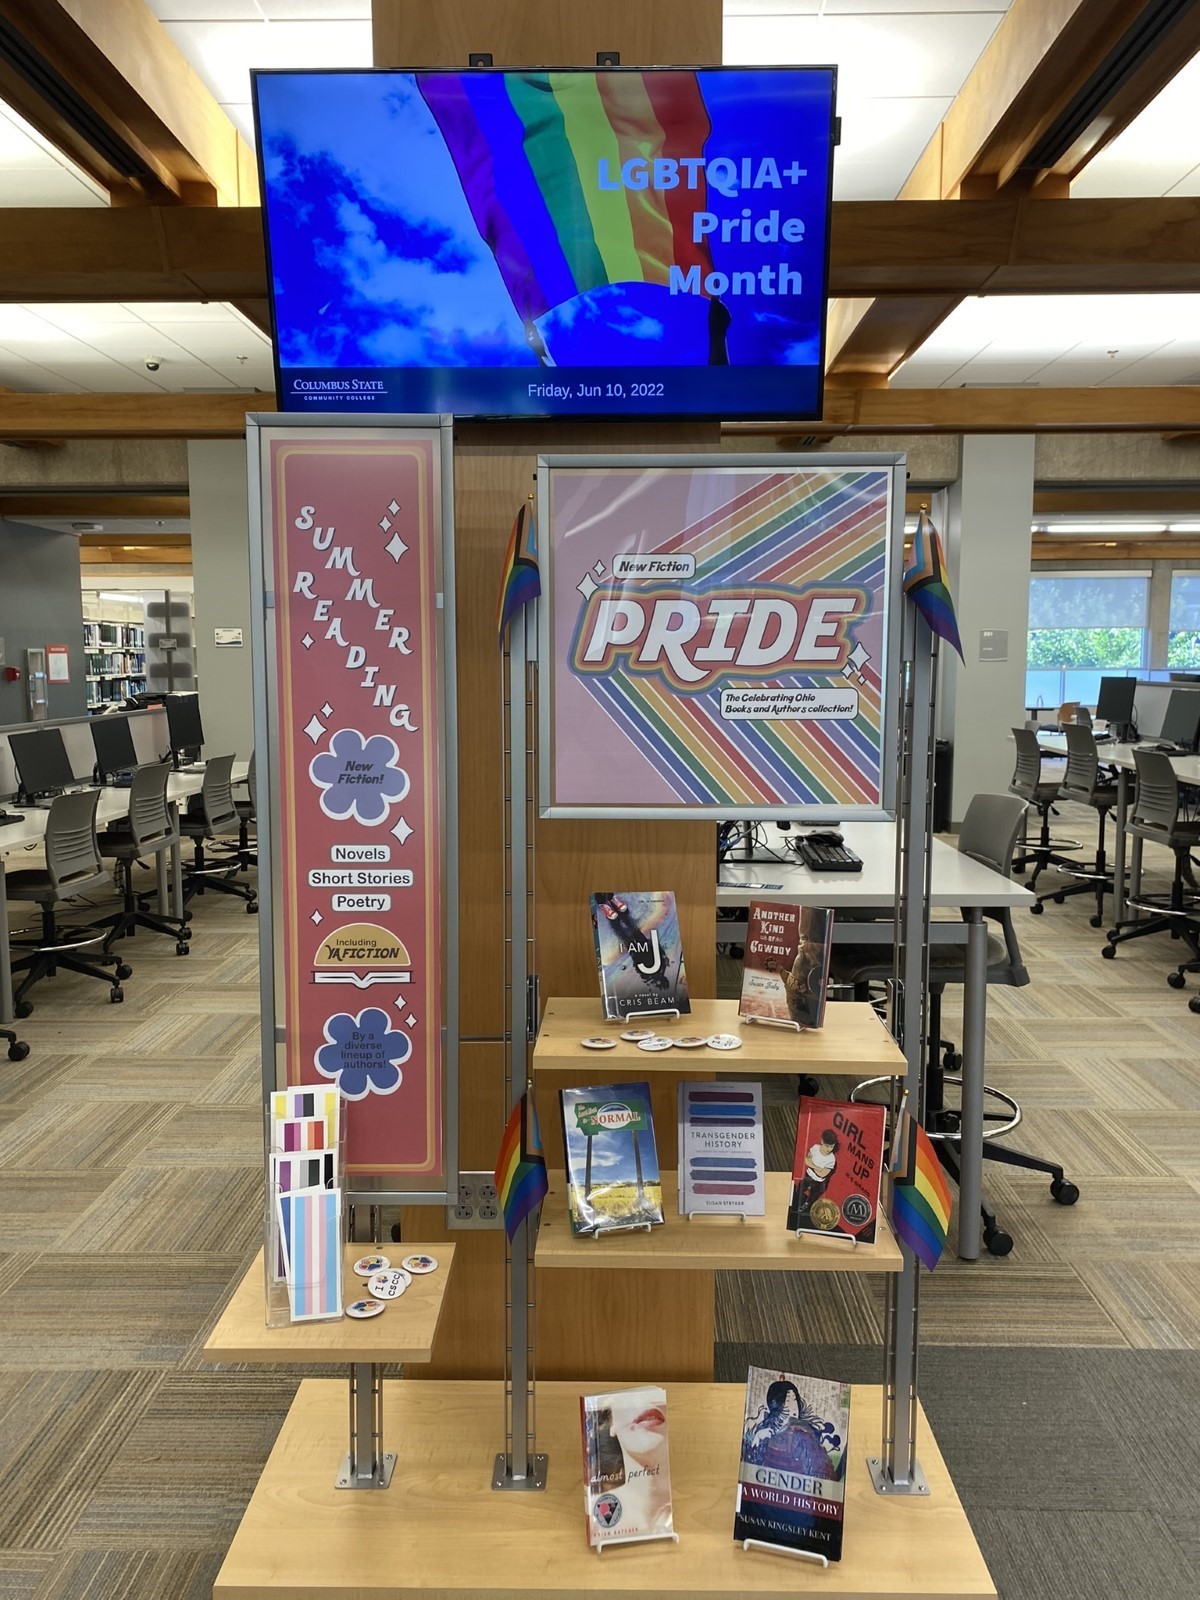 The display of the Pride Month reading materials at the Library.